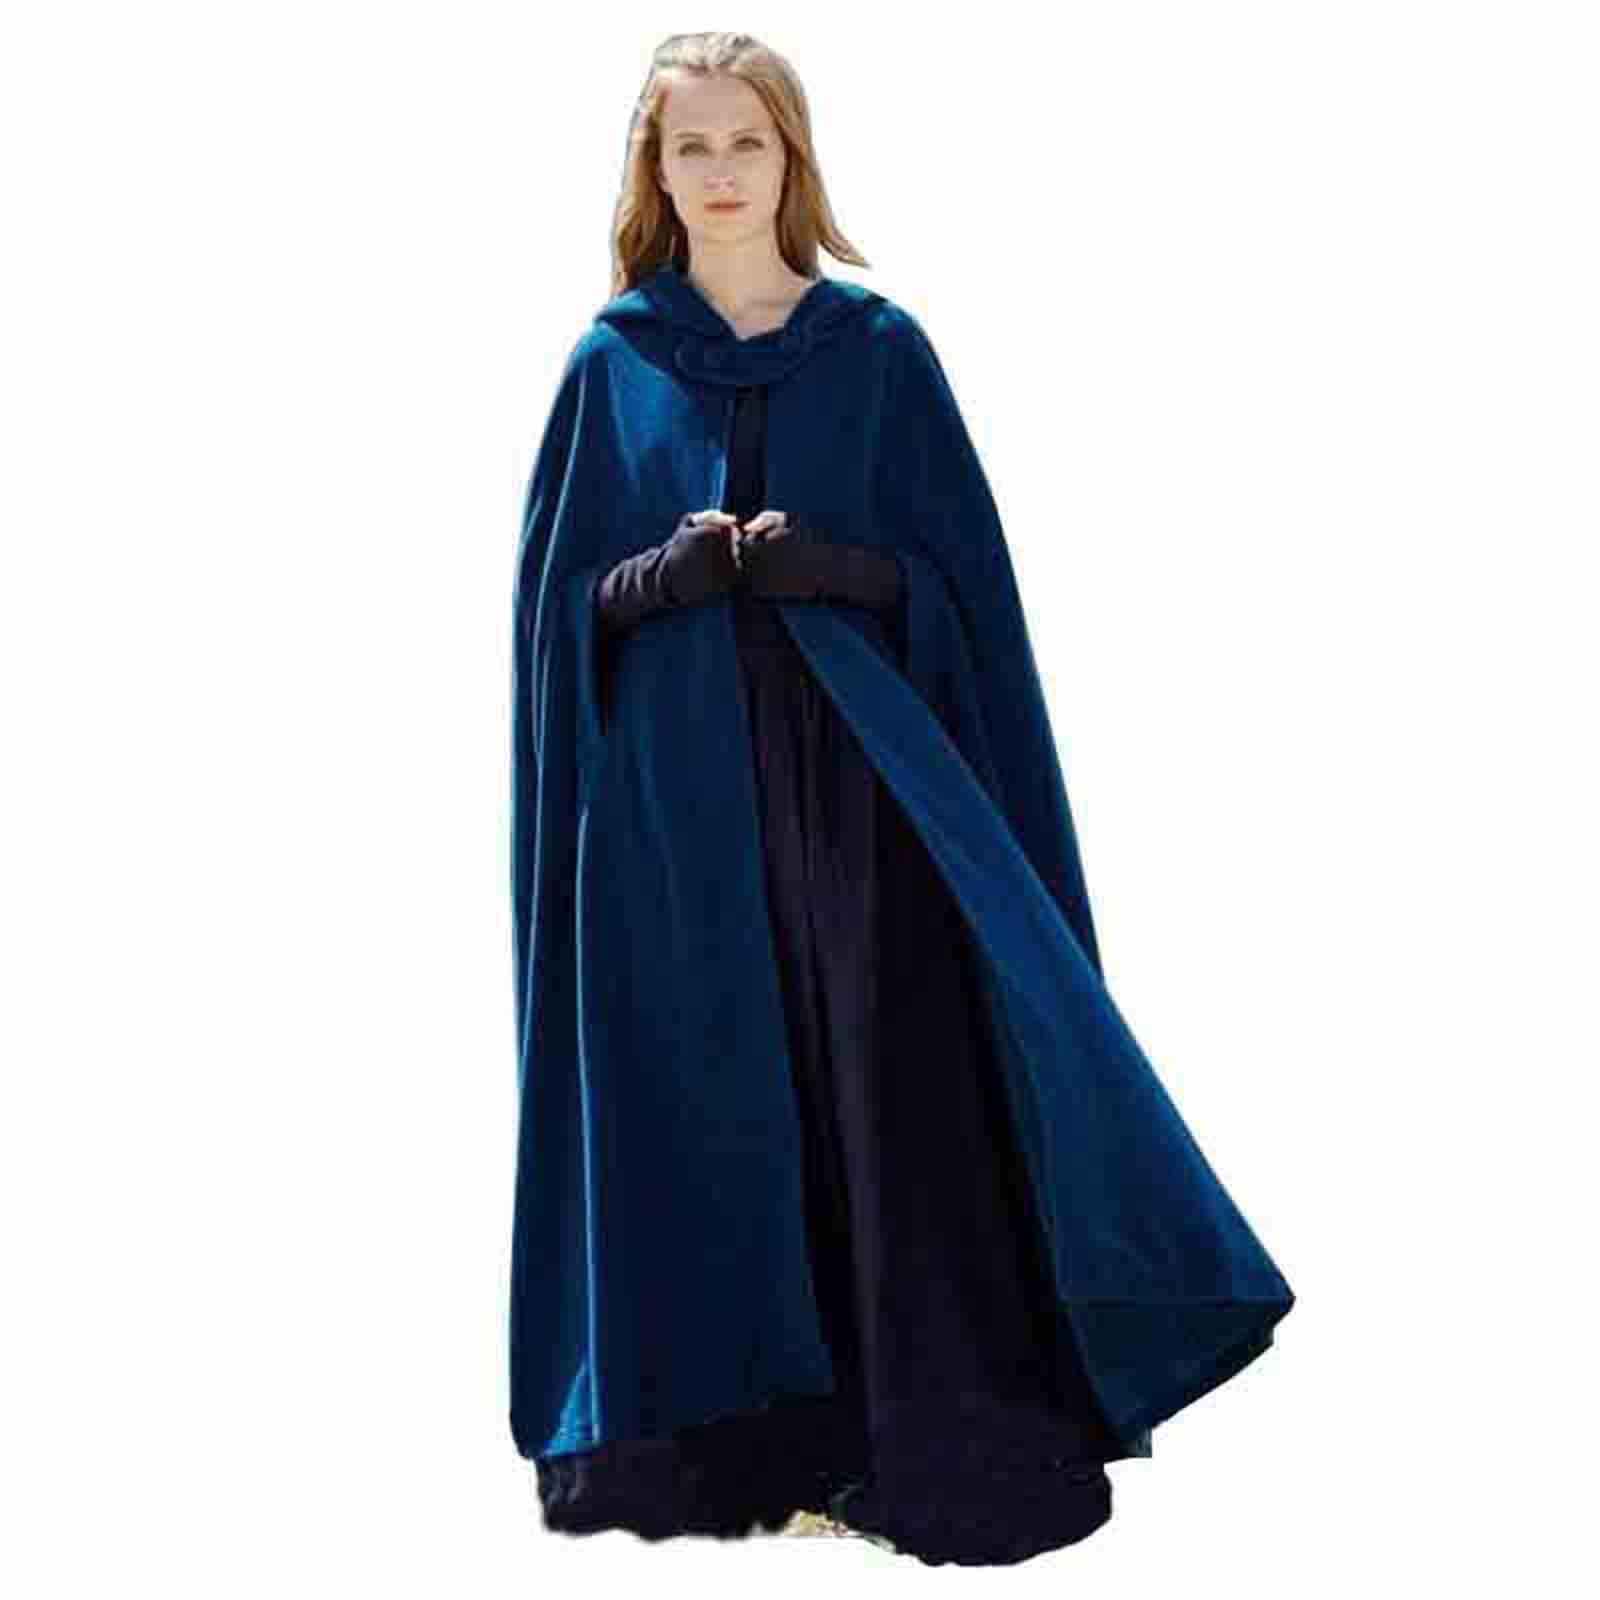  Yihaojia Women's Gothic Hooded Open Front Poncho Cape Coat  Outwear Jacket Renaissance Hooded Cape Vintage Medieval Cloak  clearance,sale prime clearance items for women clearance items under 5.00 :  Clothing, Shoes 